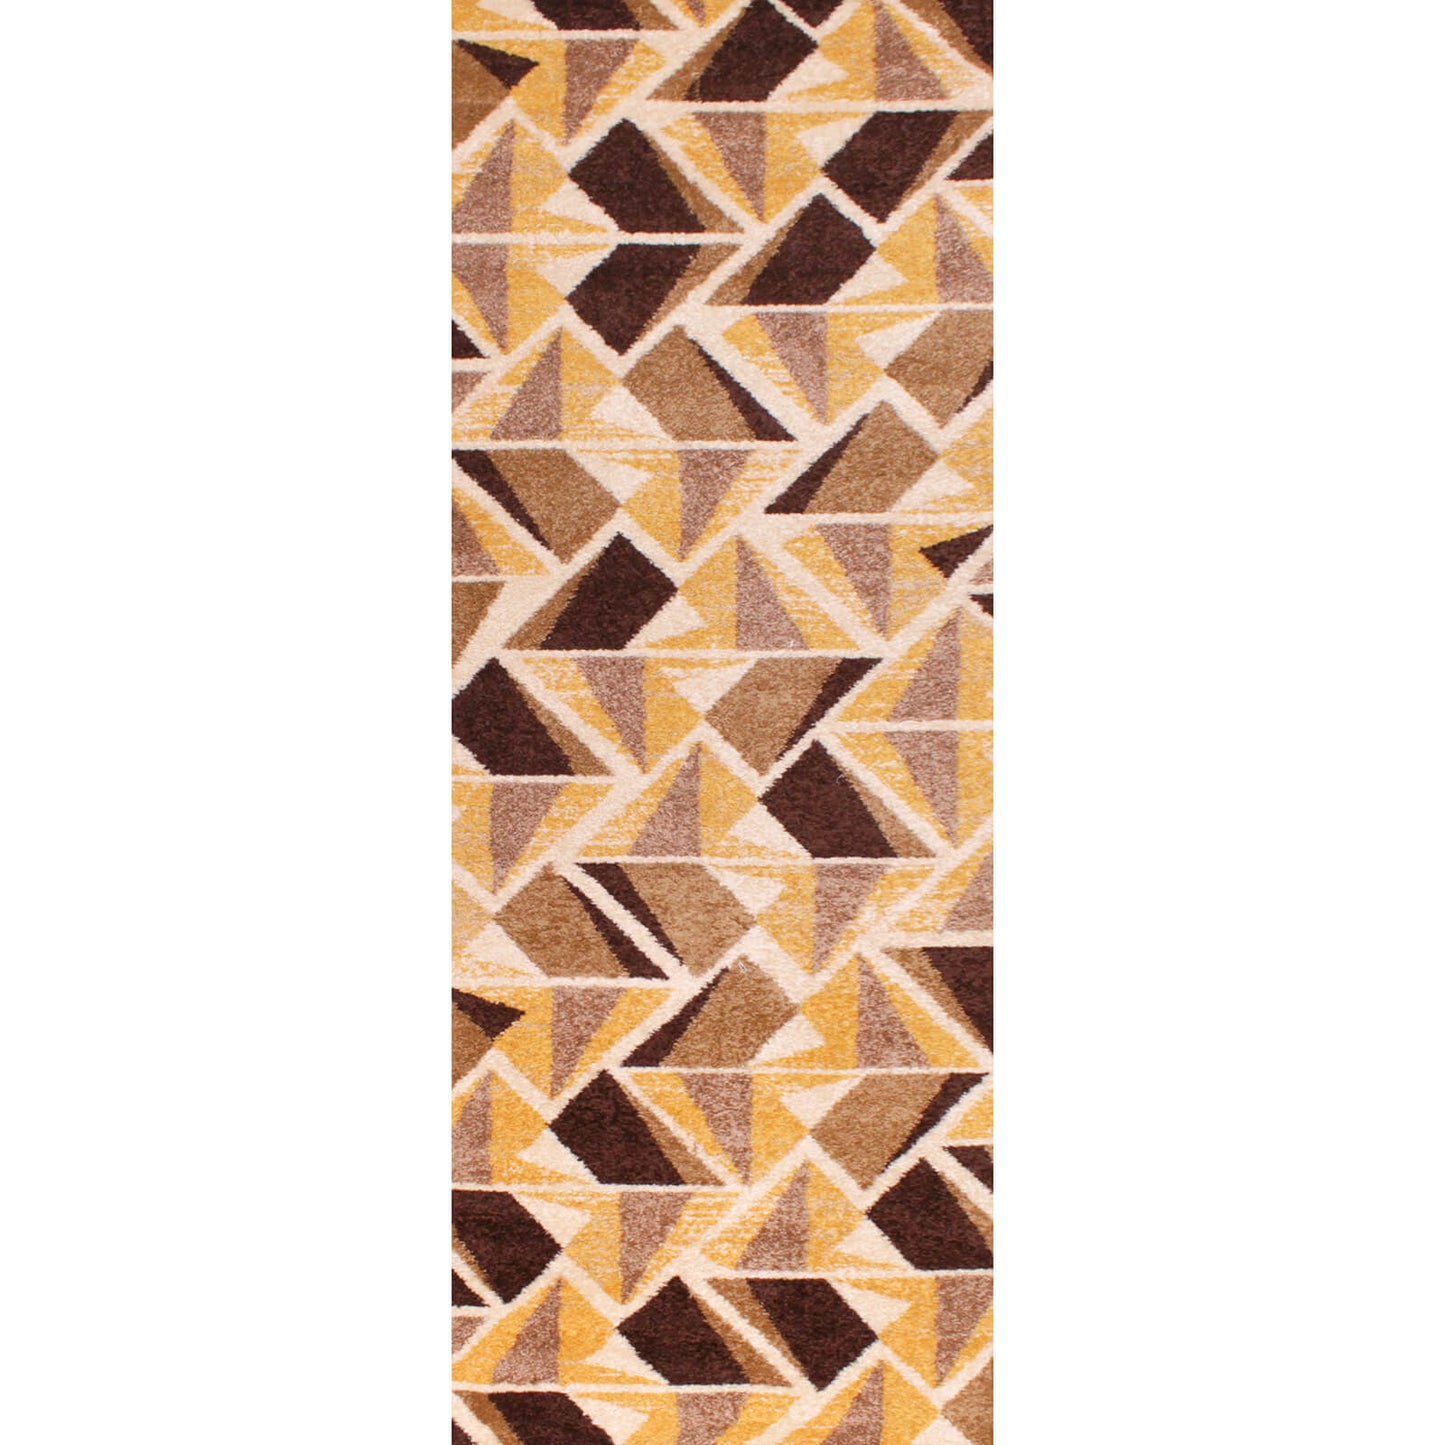 Spirit Abstract Beige and Brown Rugs